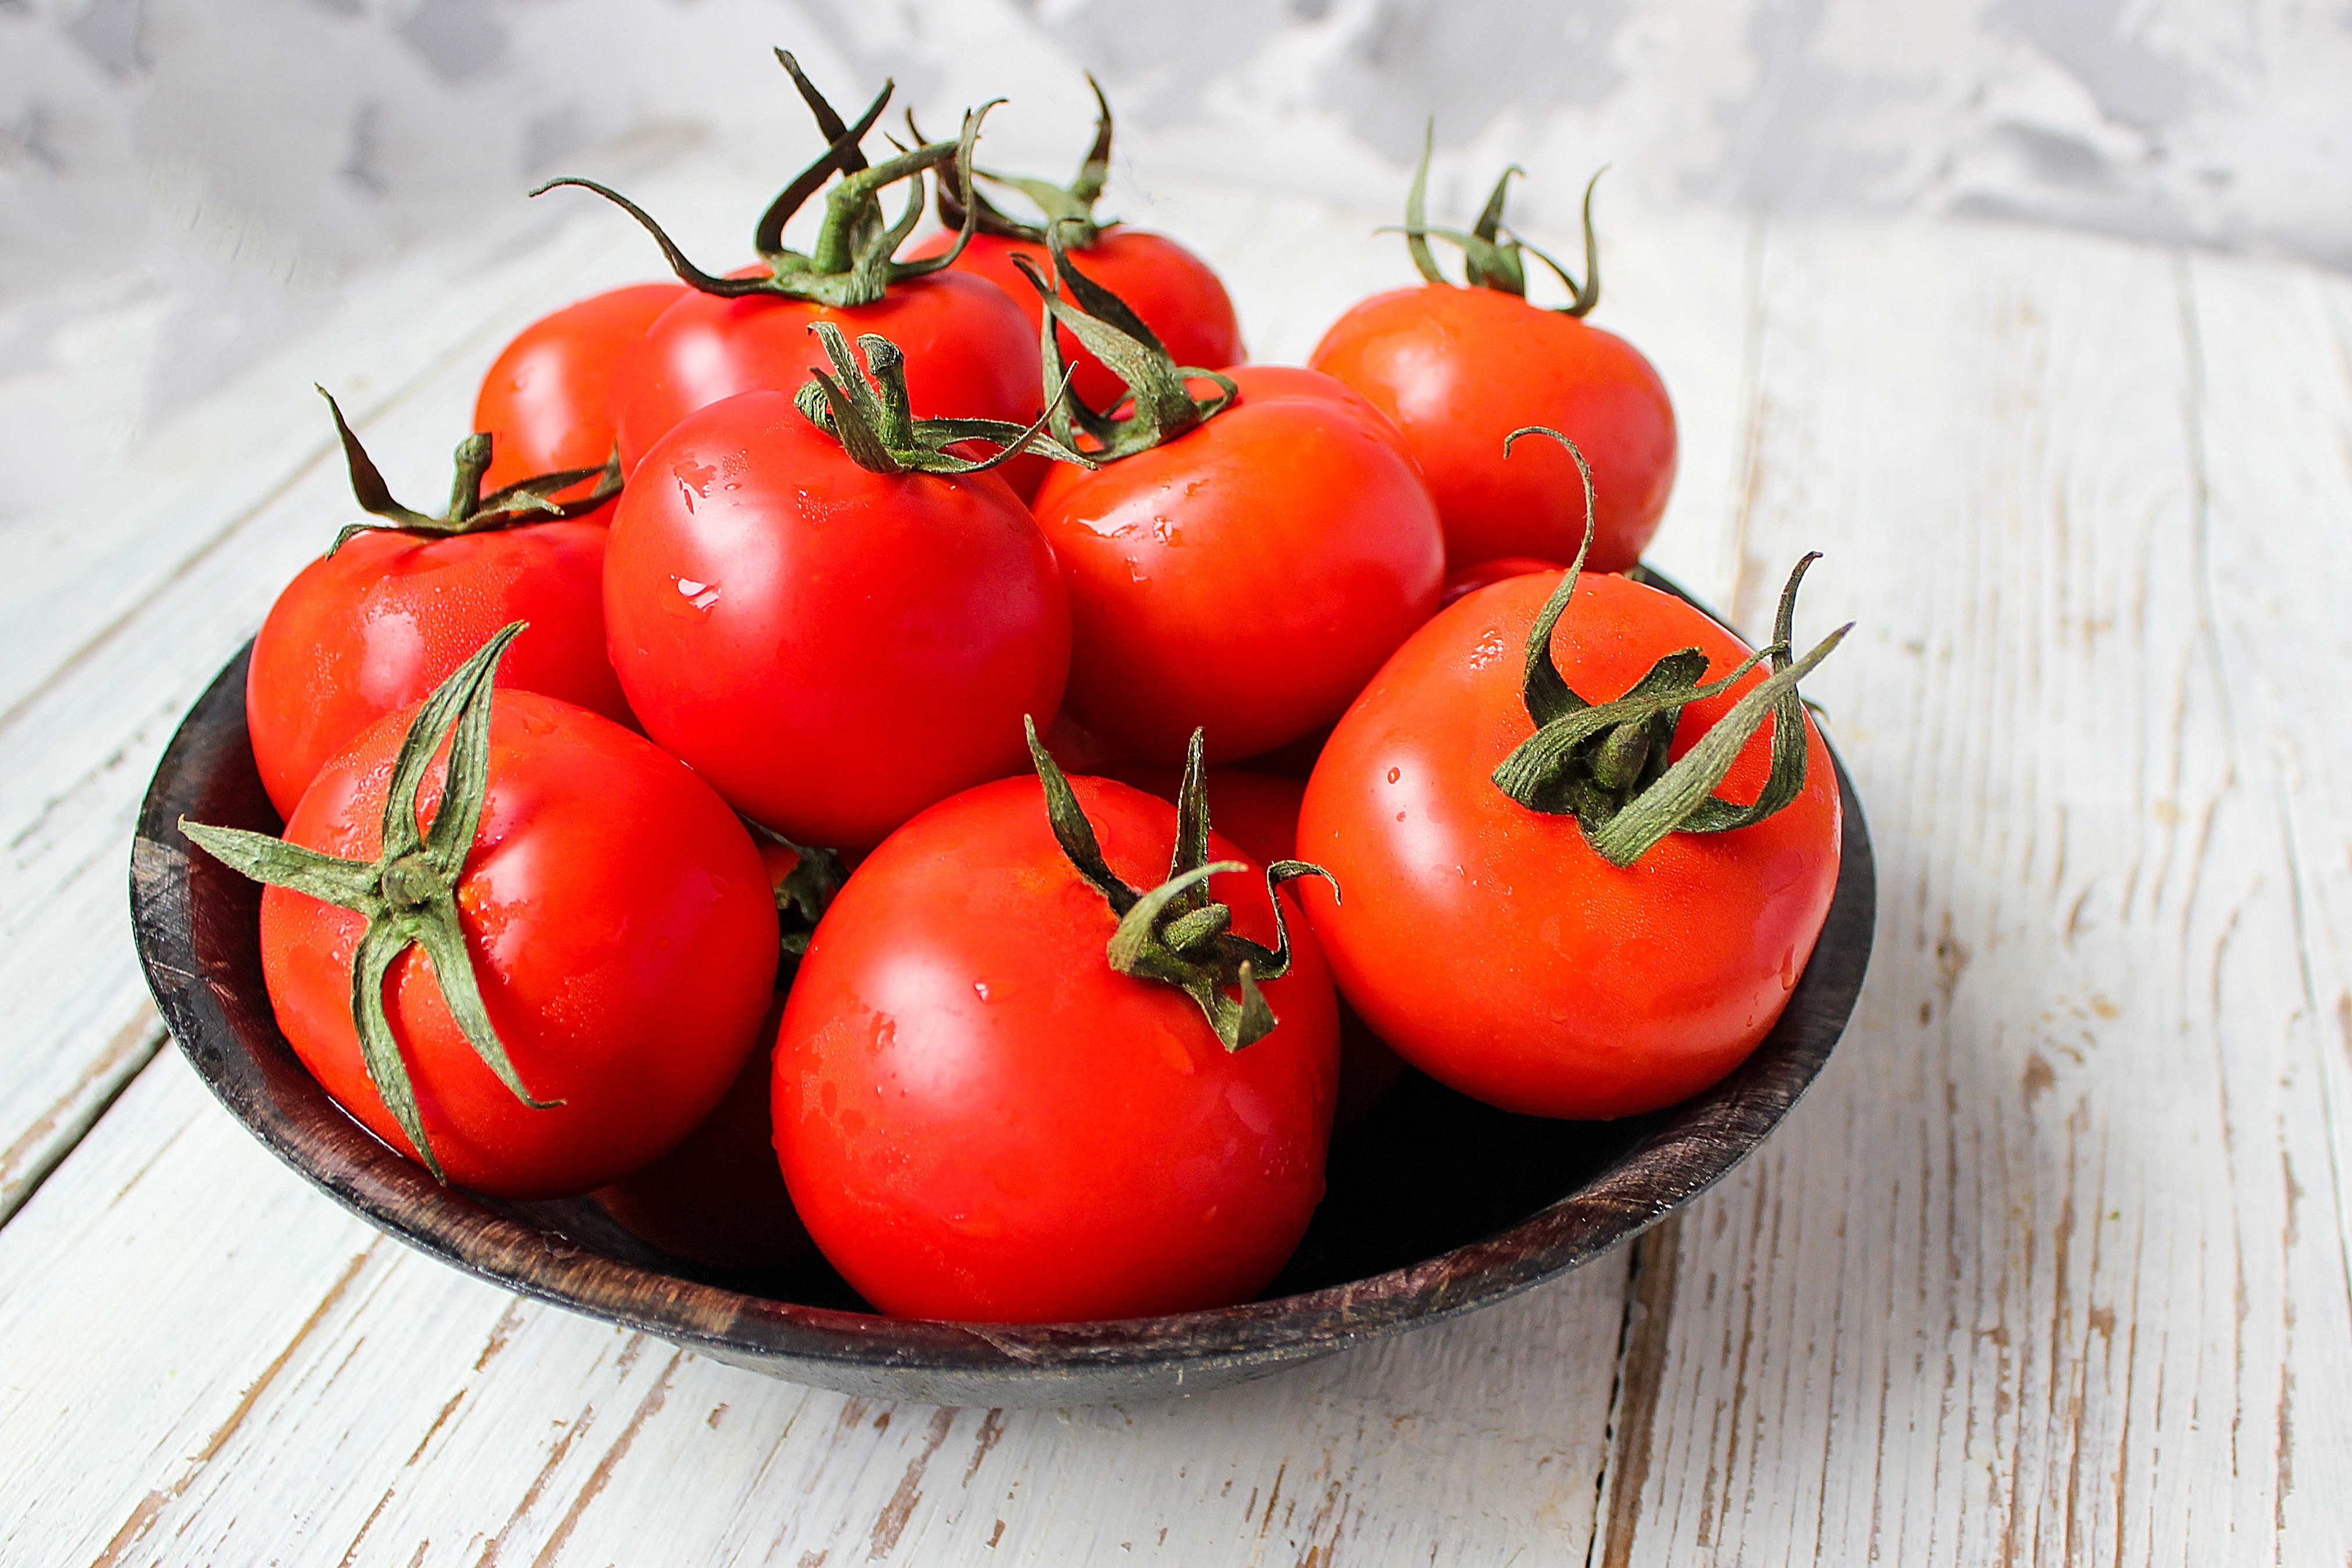 Eating too many Tomatoes Can Damage Your Body